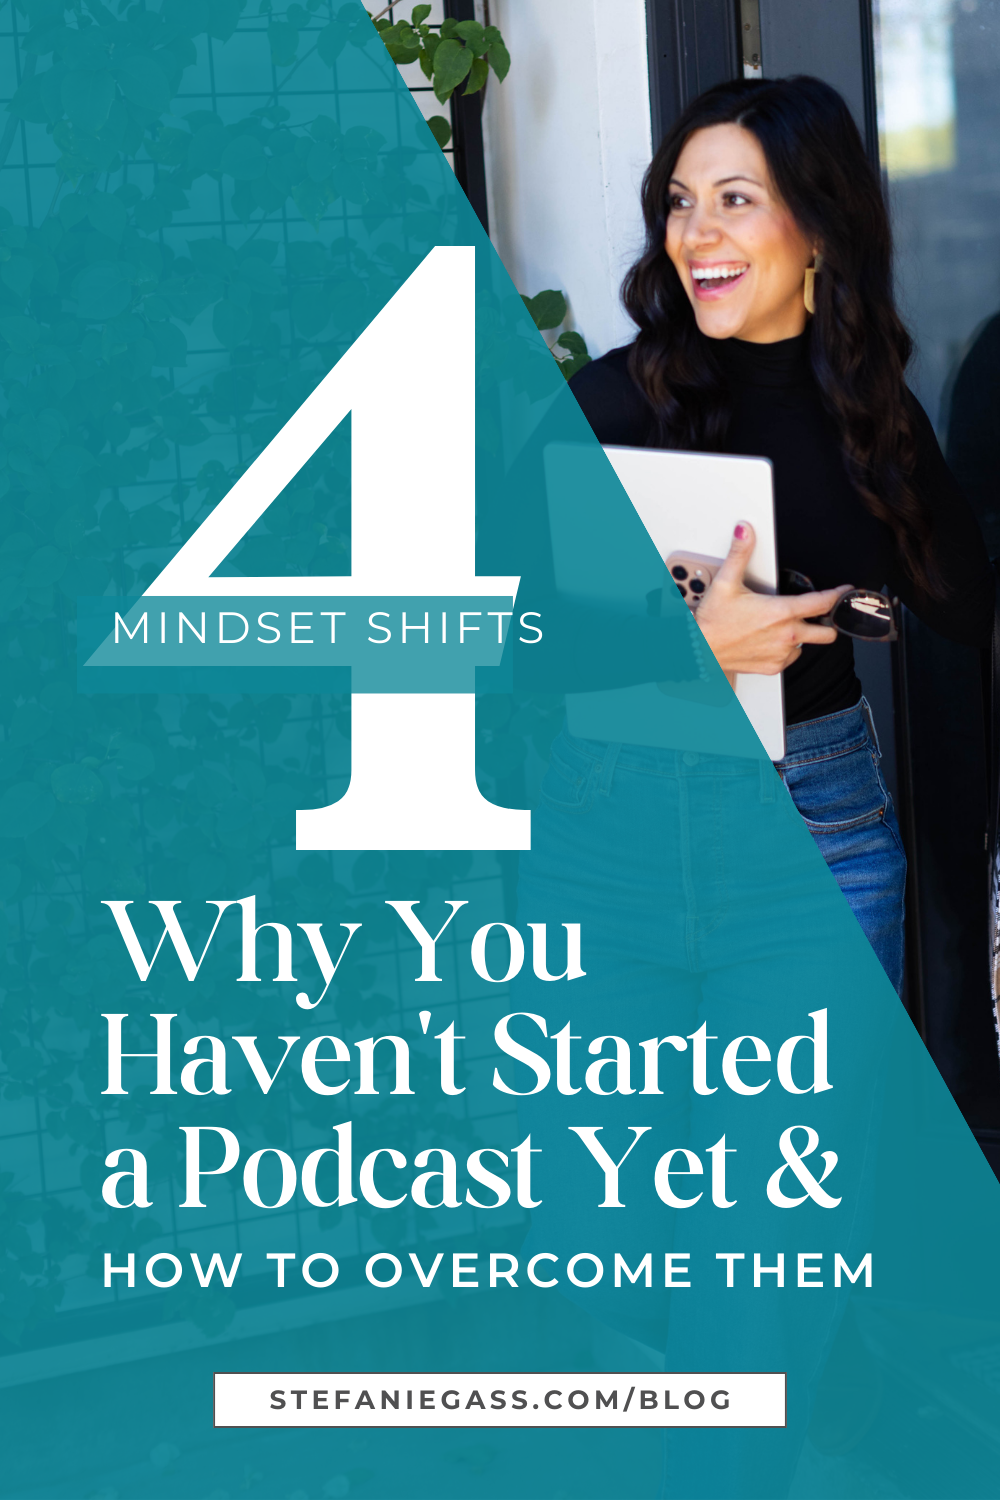 brown haired woman smiling holding lap top and wearing black. text says: 4 mindset shift: why you haven't started a podcast yet and how to overcome them